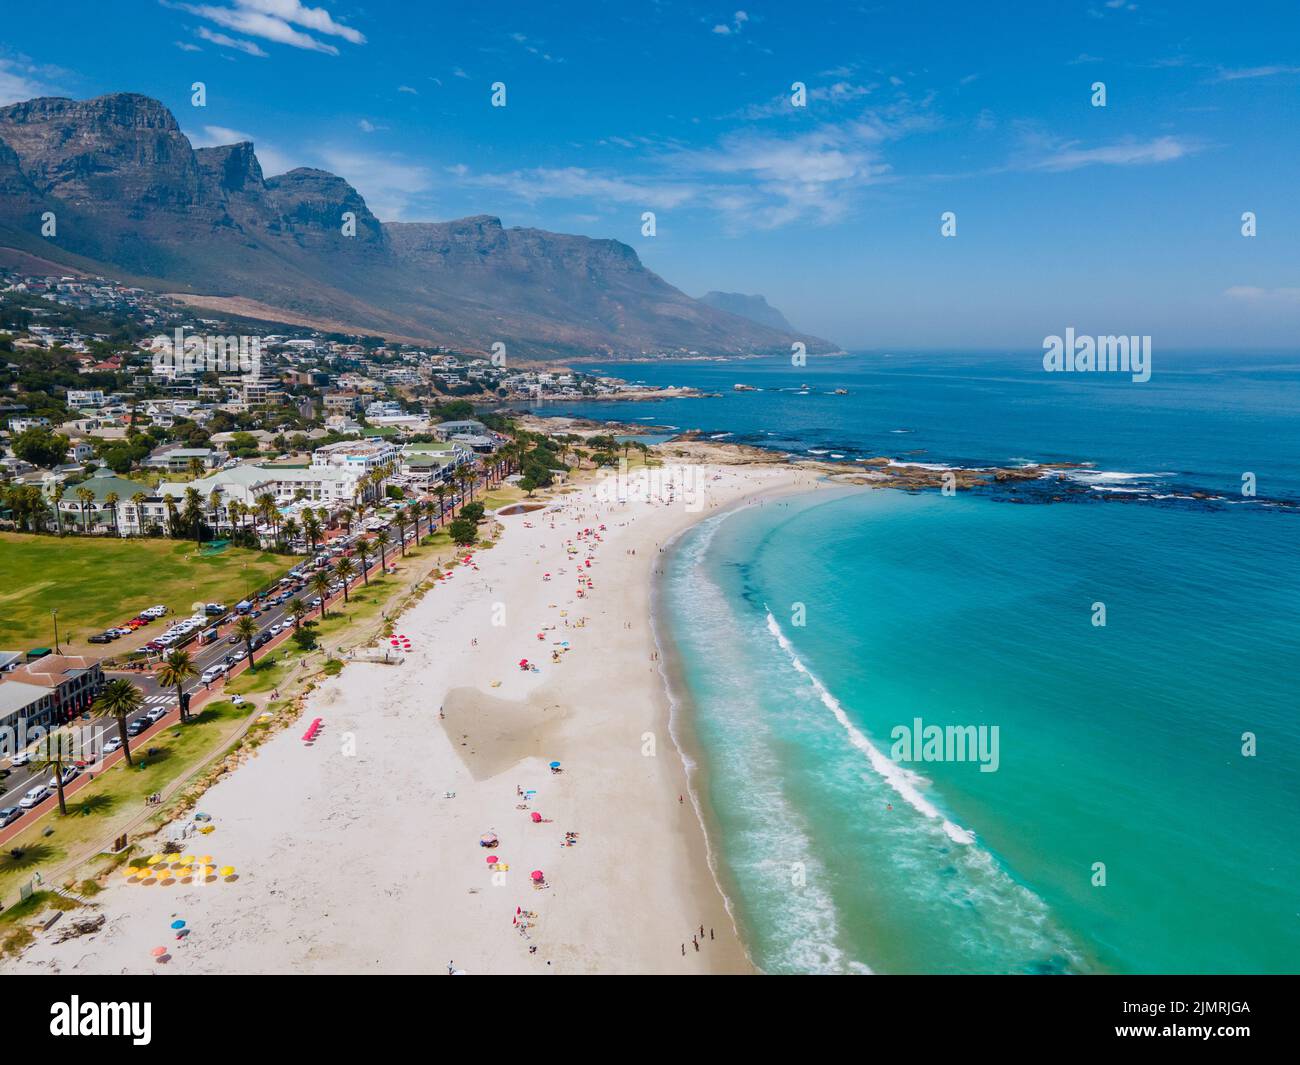 View from The Rock viewpoint in Cape Town over Campsbay, view over Camps Bay with fog over the ocean Stock Photo